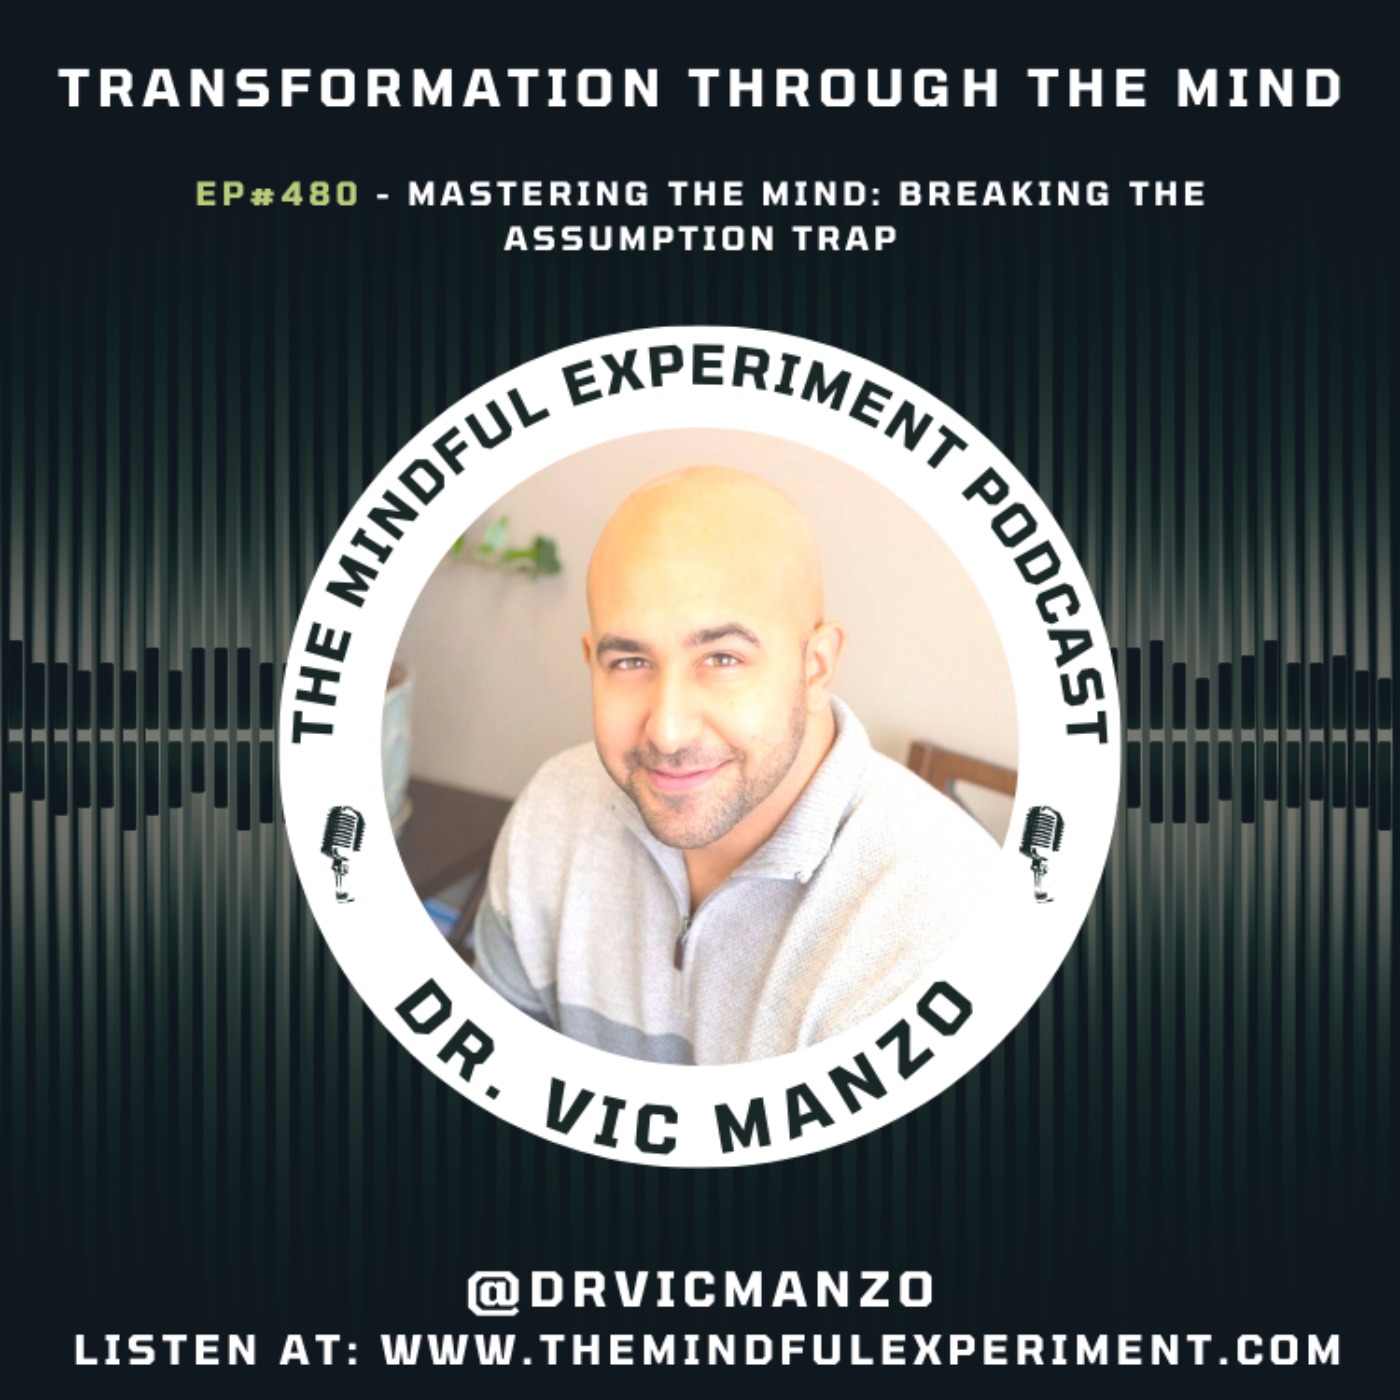 EP#480 - Mastering the Mind: Breaking the Assumption Trap